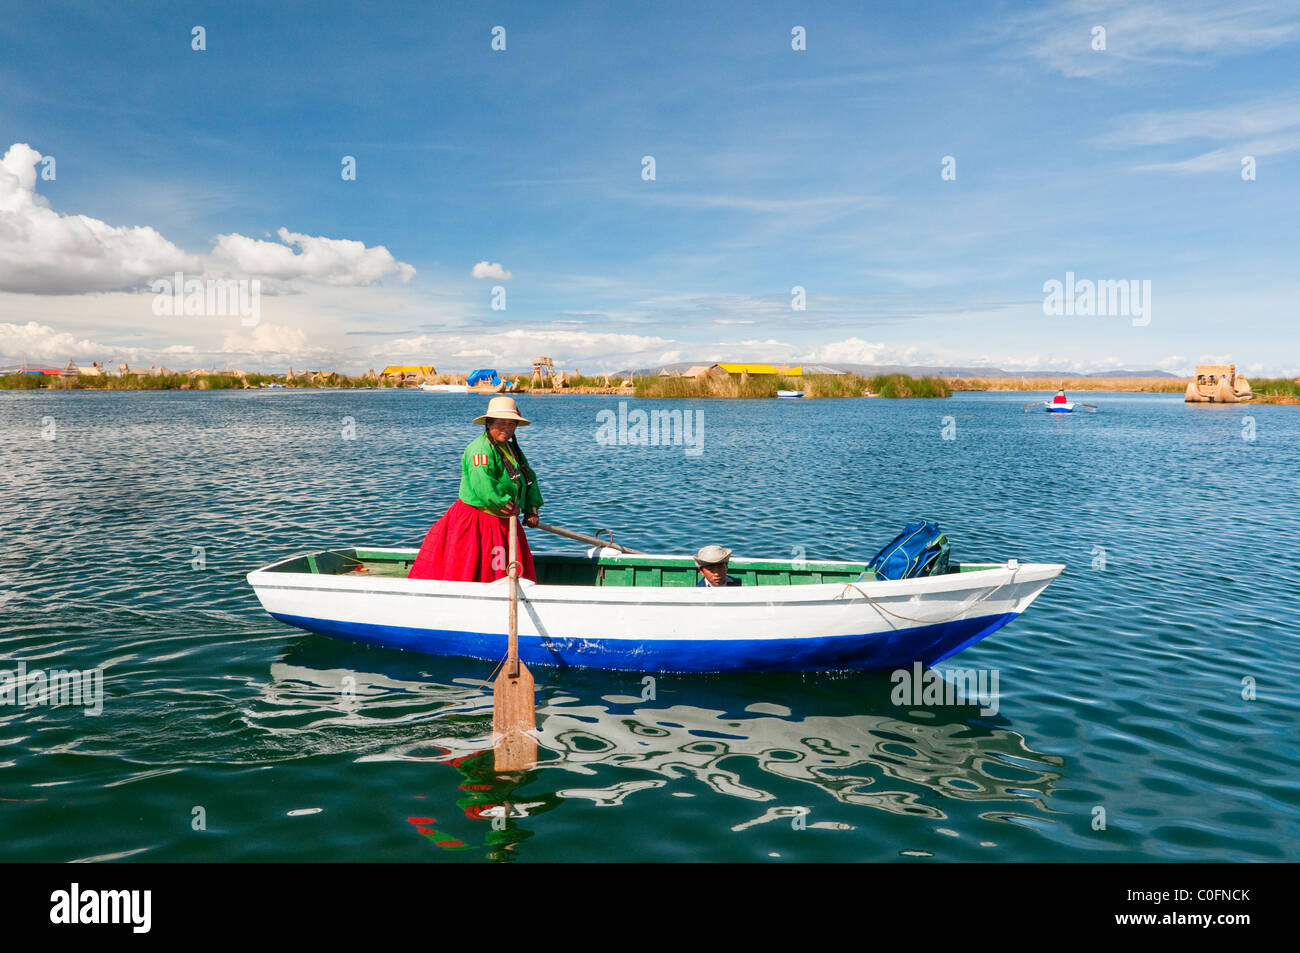 A woman rowing a boat at the floating Islands in Lake Titicaca, Peru, South America. Stock Photo